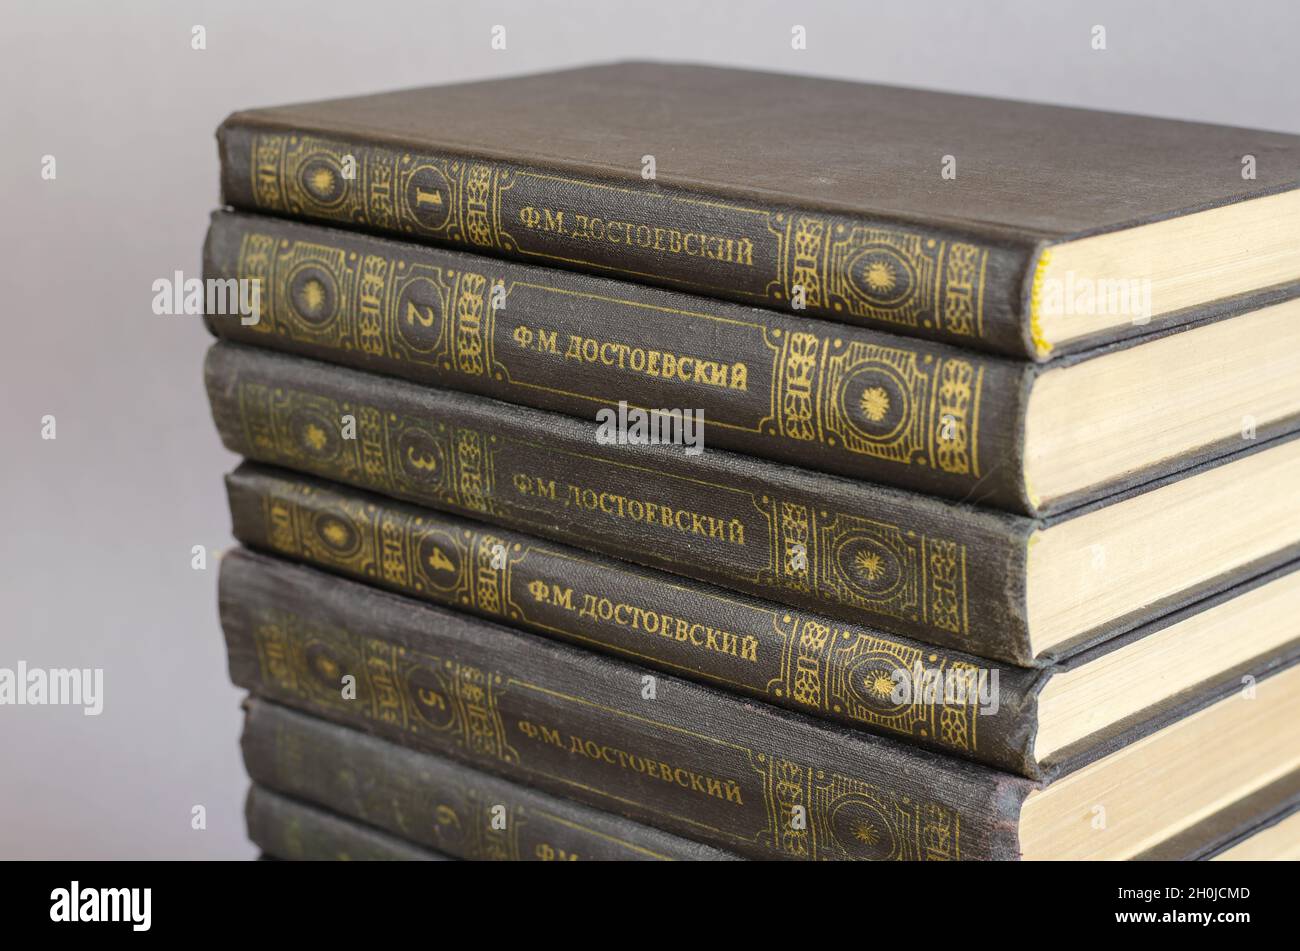 Eleven volumes by the famous Russian writer, thinker, philosopher and essayist Fyodor Dostoevsky. A stack of old hardcover books on a gray background. Stock Photo